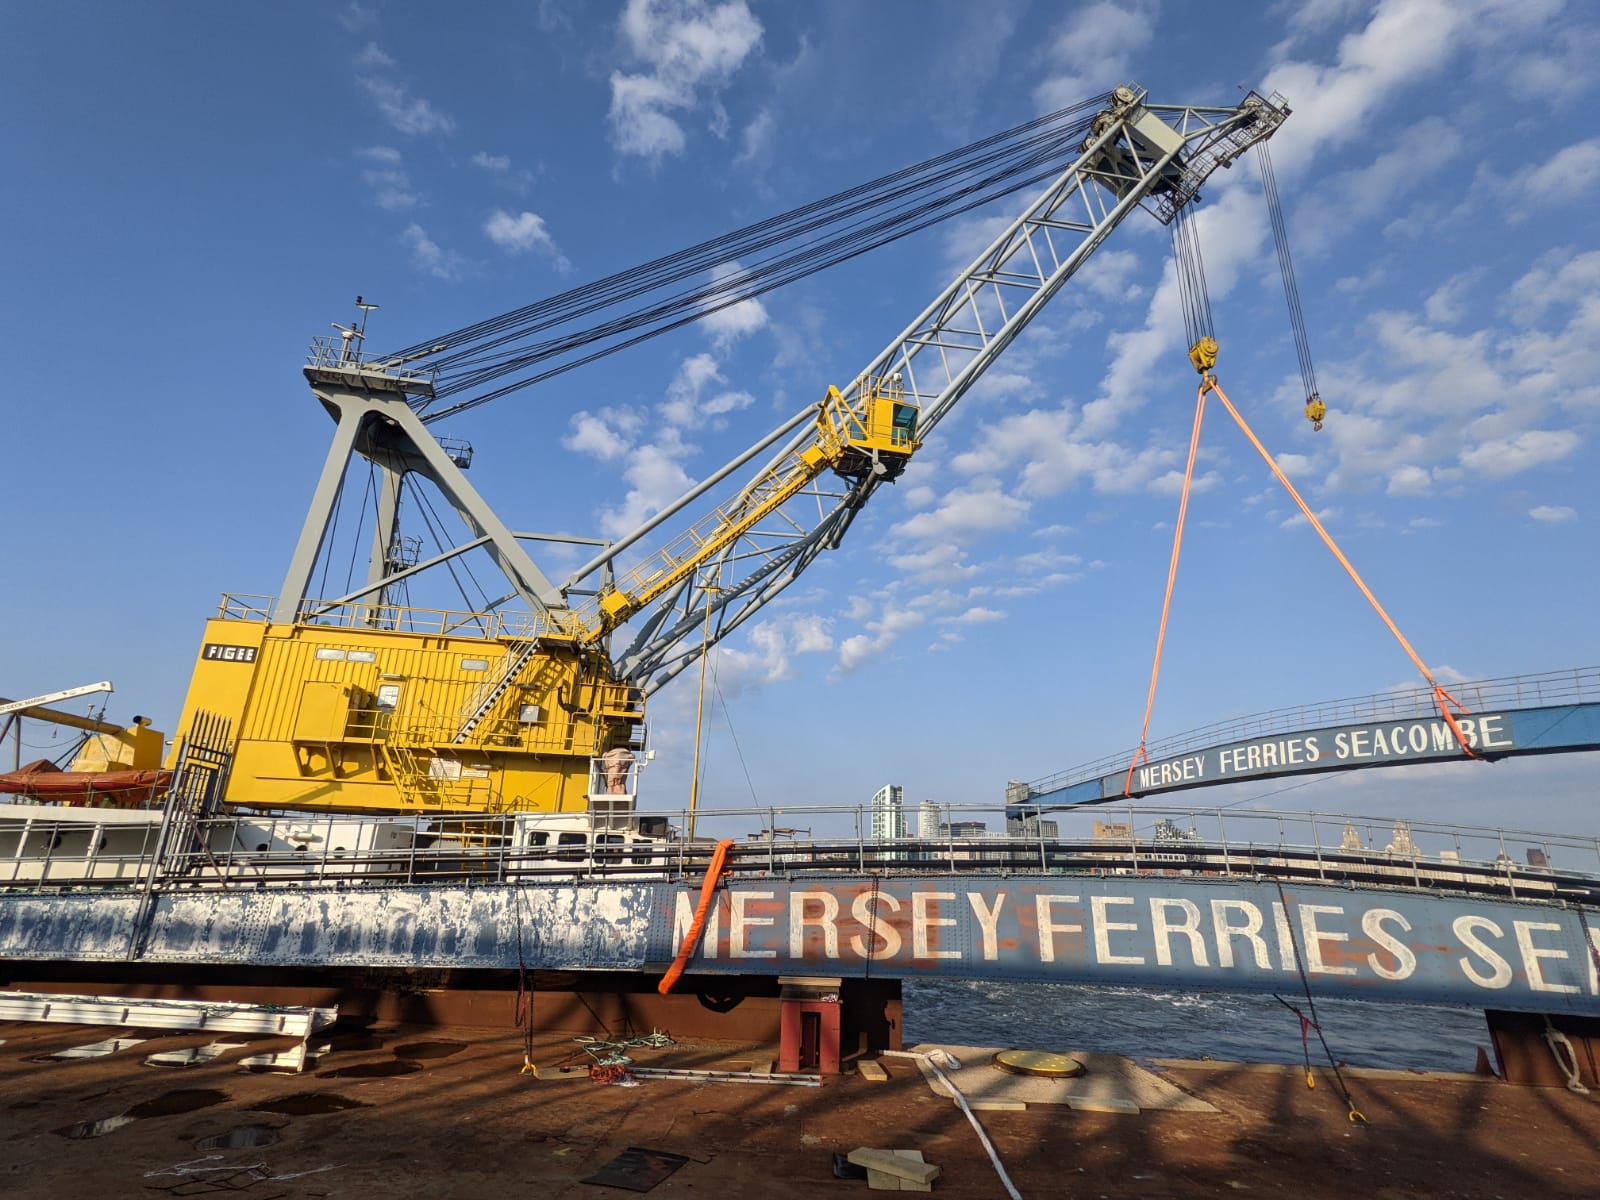 Merry Ferry linkspans being removed by yellow crane.